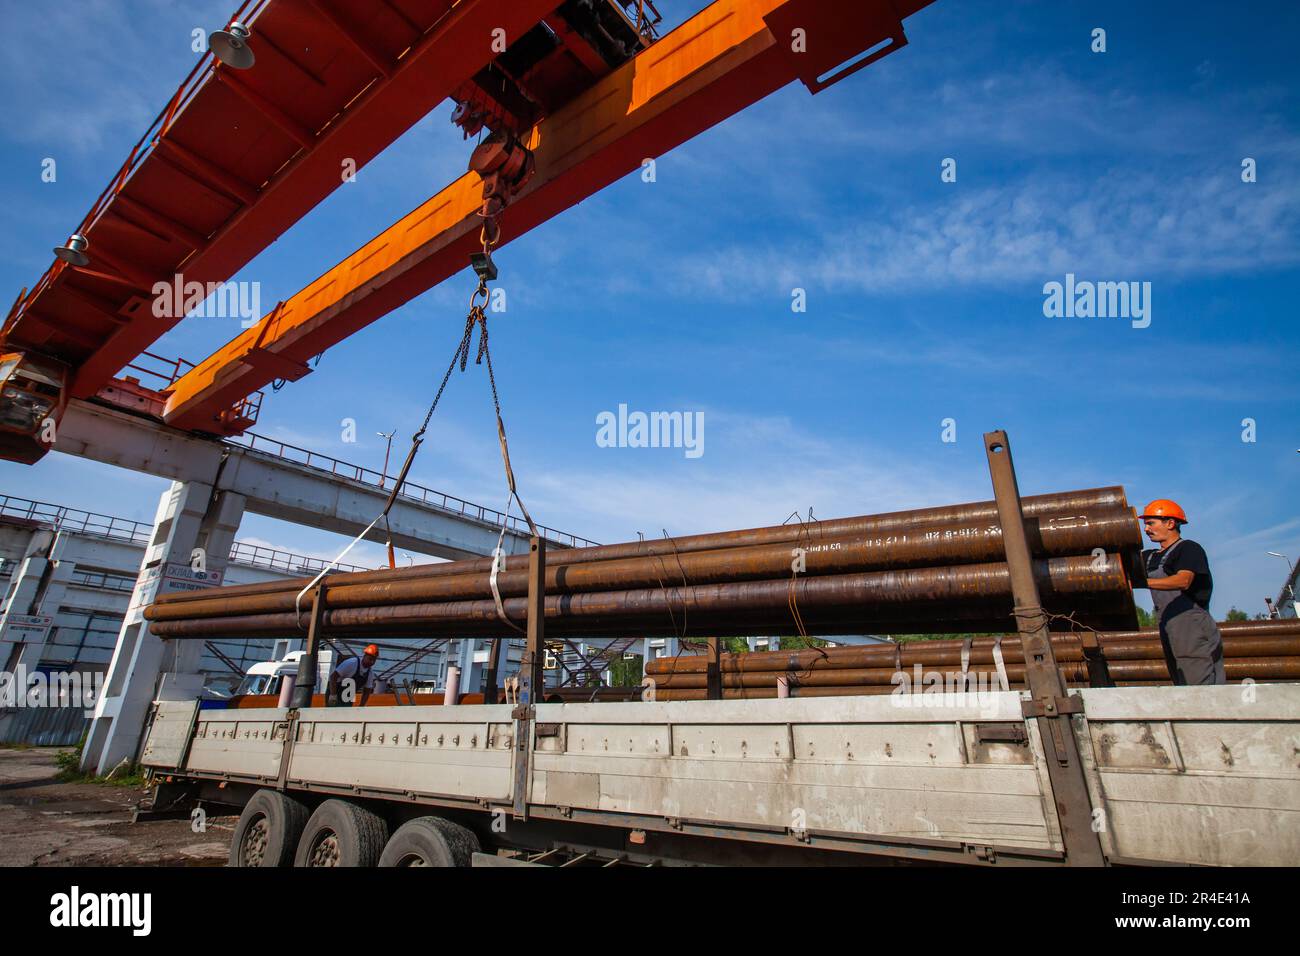 Podolsk, Moscow province - August 02, 2021: Pipes warehouse. Loading pipes with overhead crane. Stock Photo